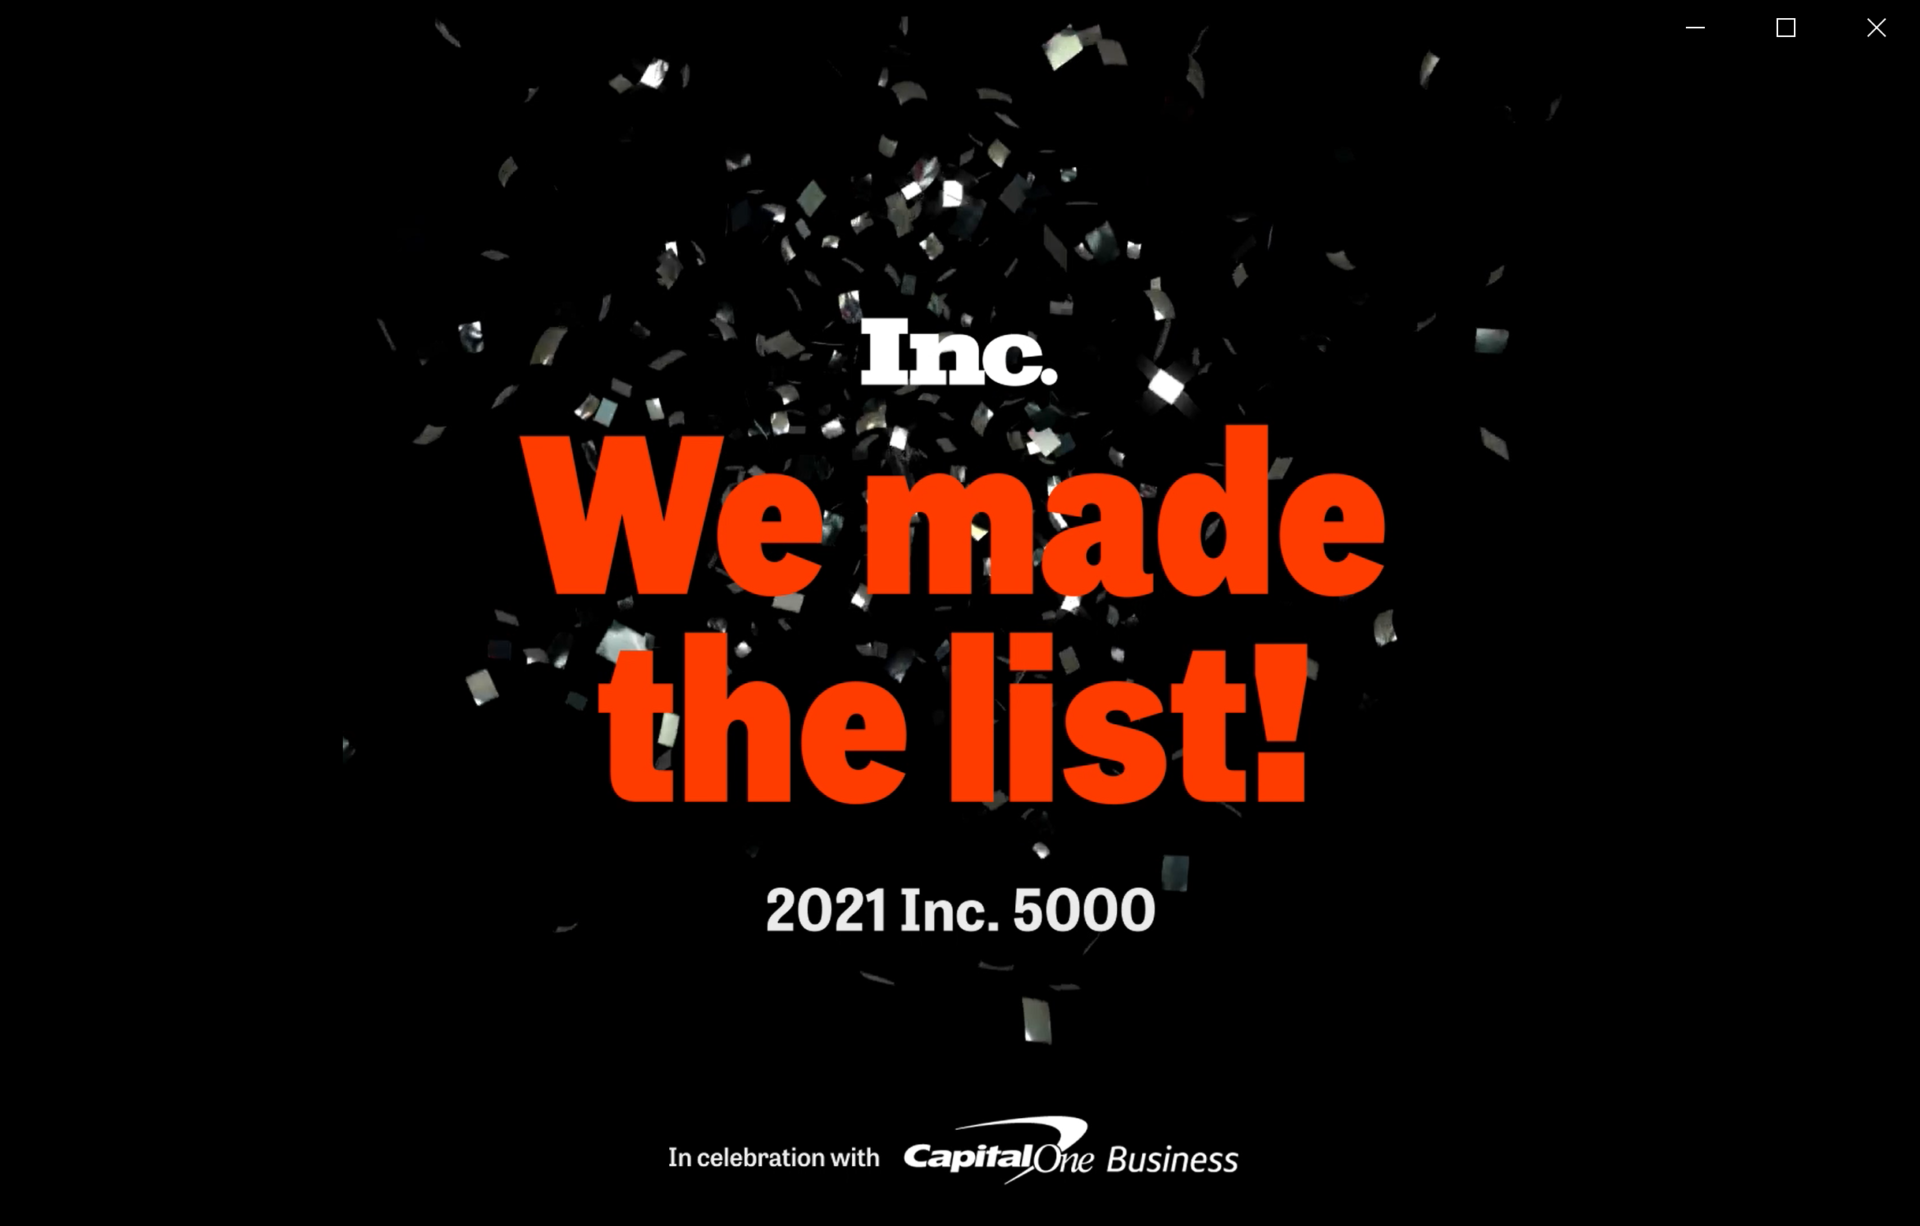 USME | Equipment Rentals, Sales & Management Solutions | Top Work Places 2021 | Among 5000 America fastest growing Inc.